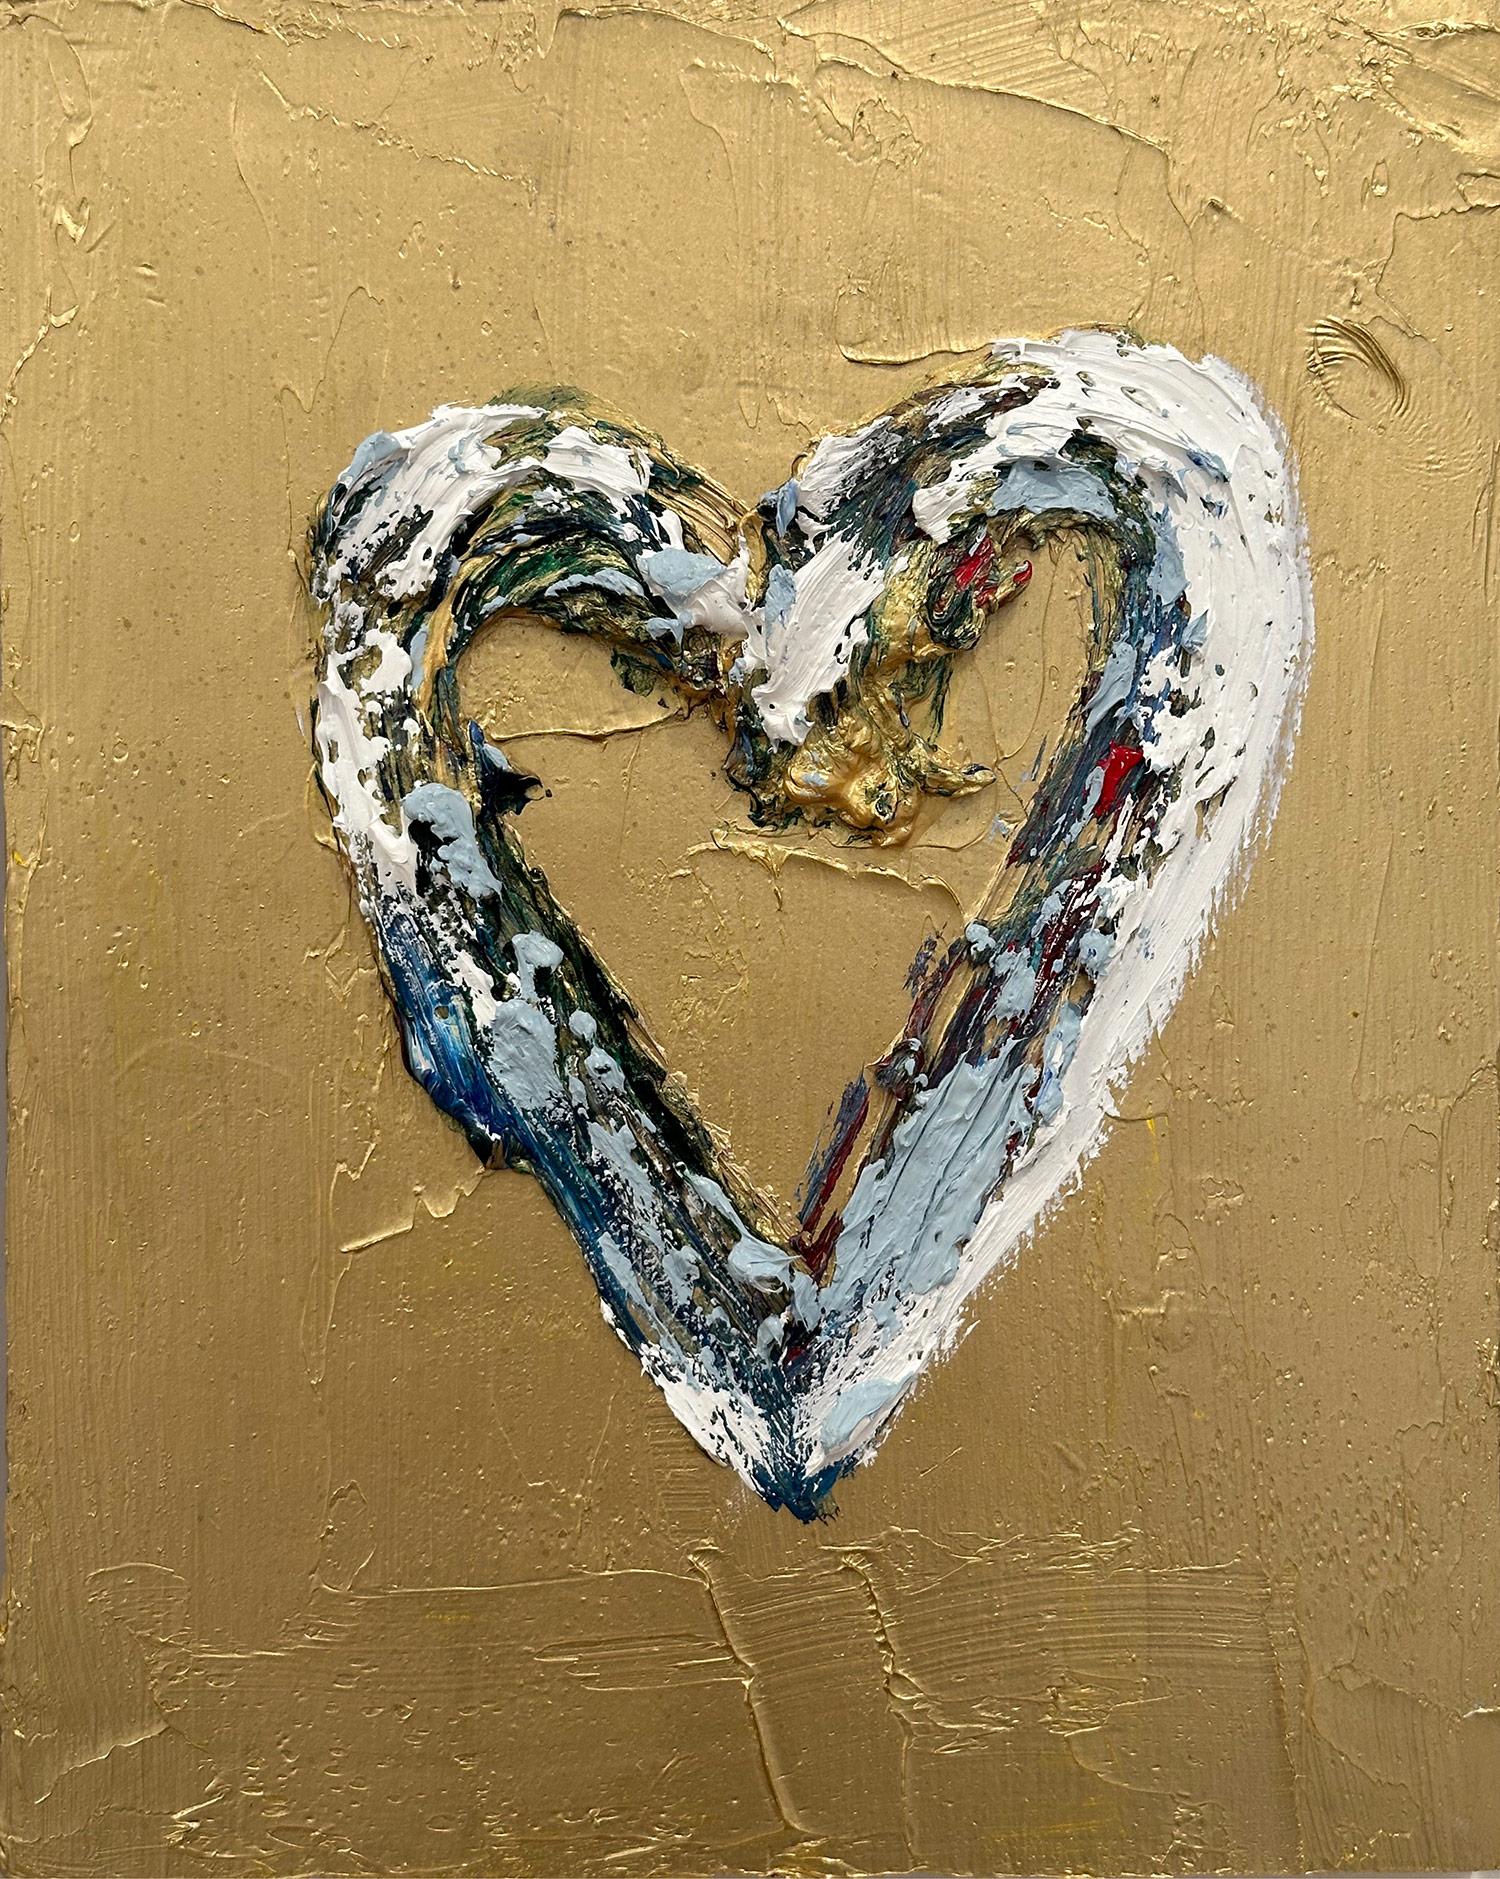 Motivated by bold color and fast brushwork, we are moved by the simplicity and thick textured oil paints in these works. Shaoul’s “My Heart Collection” is a vibrant and energetic display of love encapsulated in these miniature hearts, leaving us